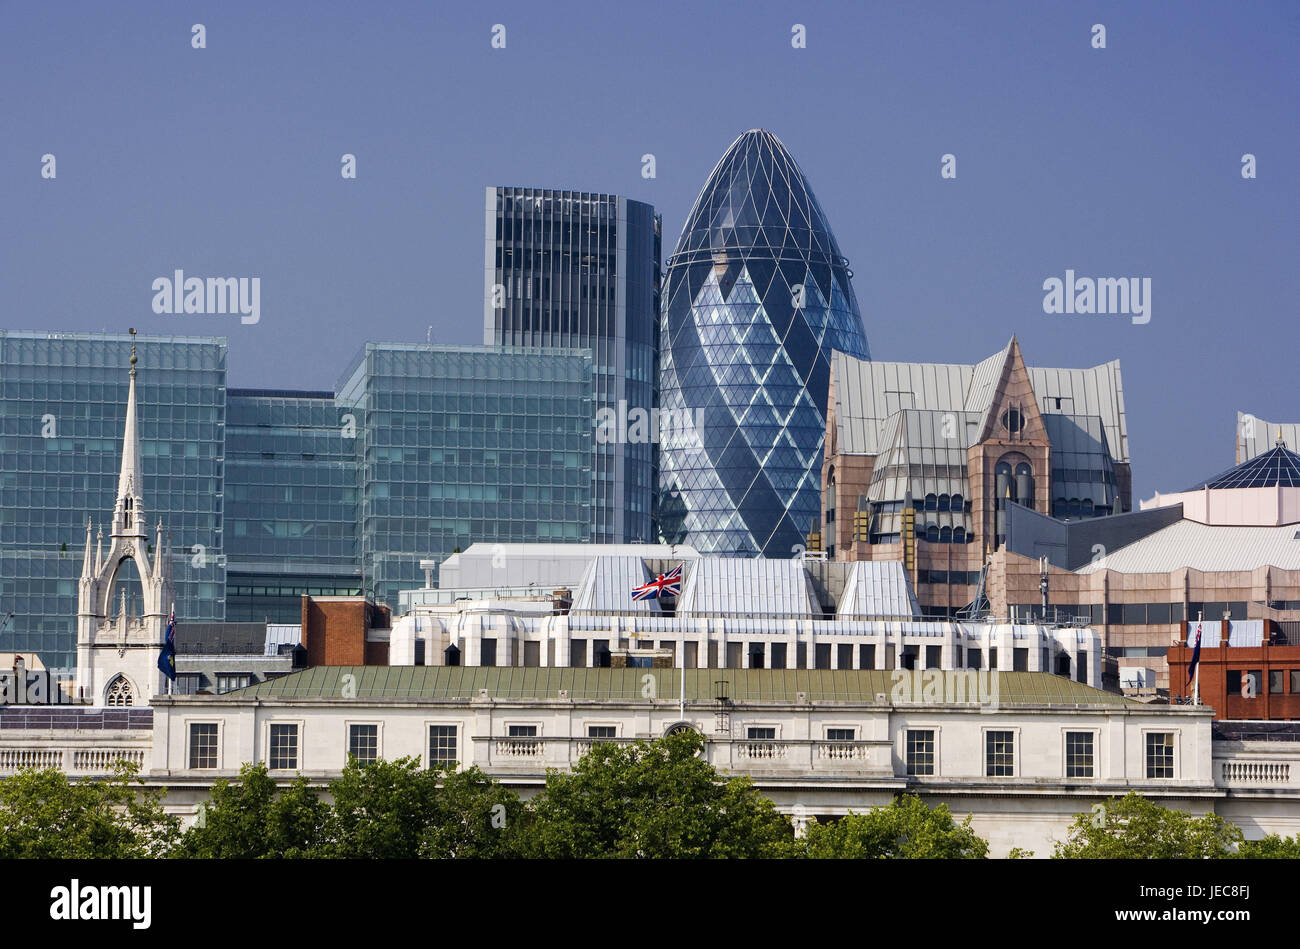 Great Britain, England, London, town view, capital, high-rise office blocks, high rises, Swiss Re Tower, Gherkin, architecture, structures, place of interest, destination, tourism, Stock Photo